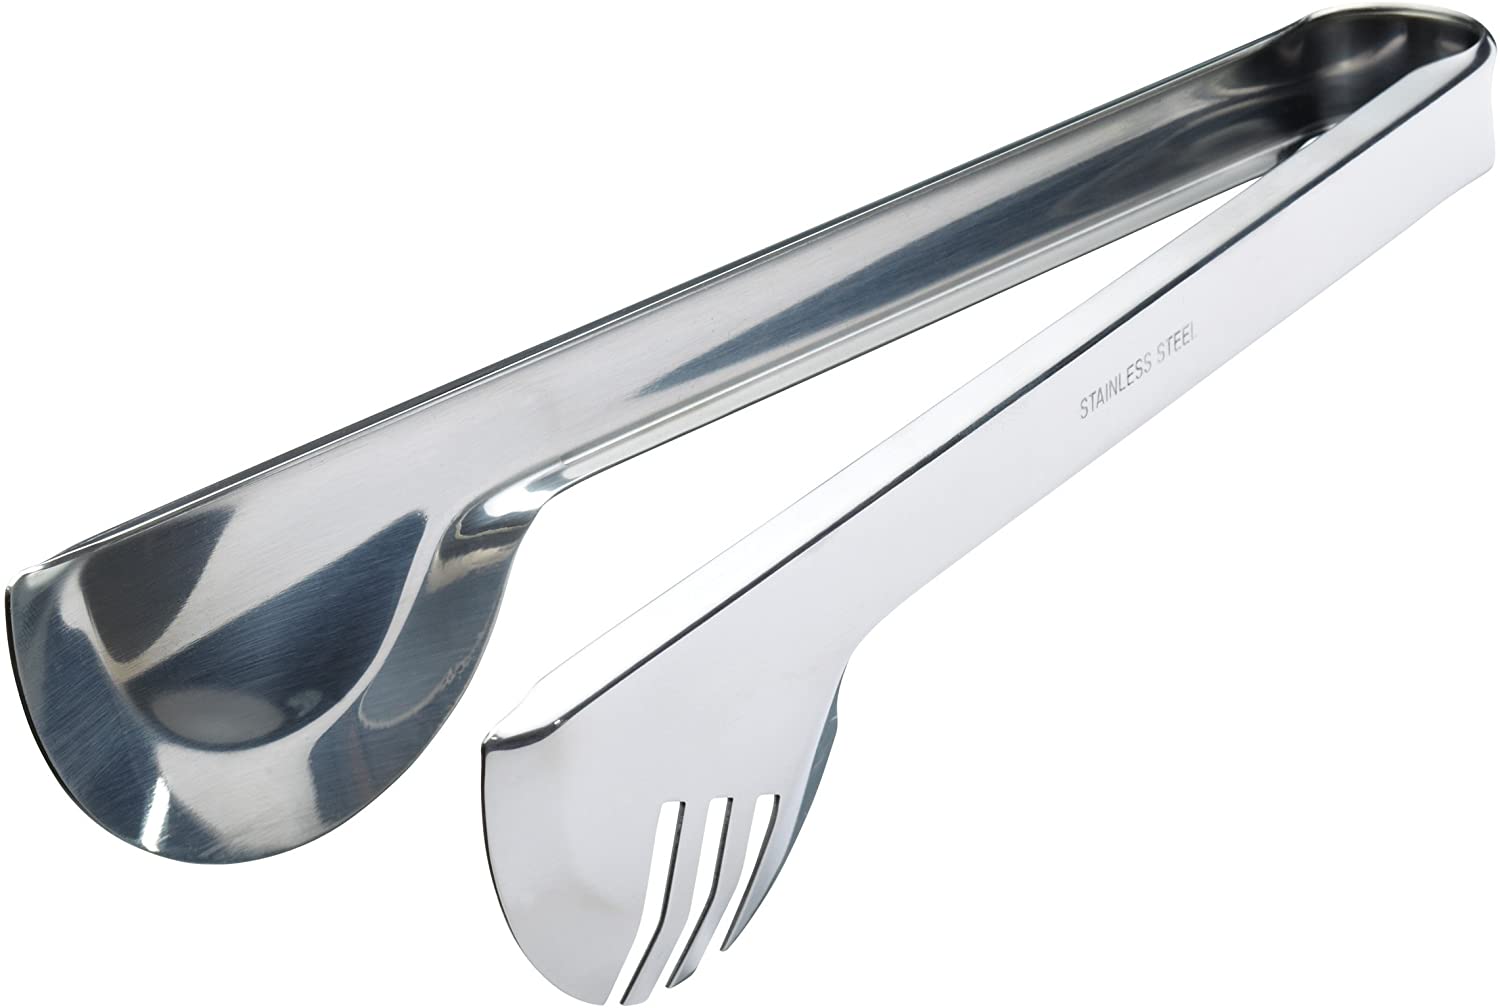 KitchenCraft Kitchen Craft Stainless Steel Deluxe Serving Tongs 24cm